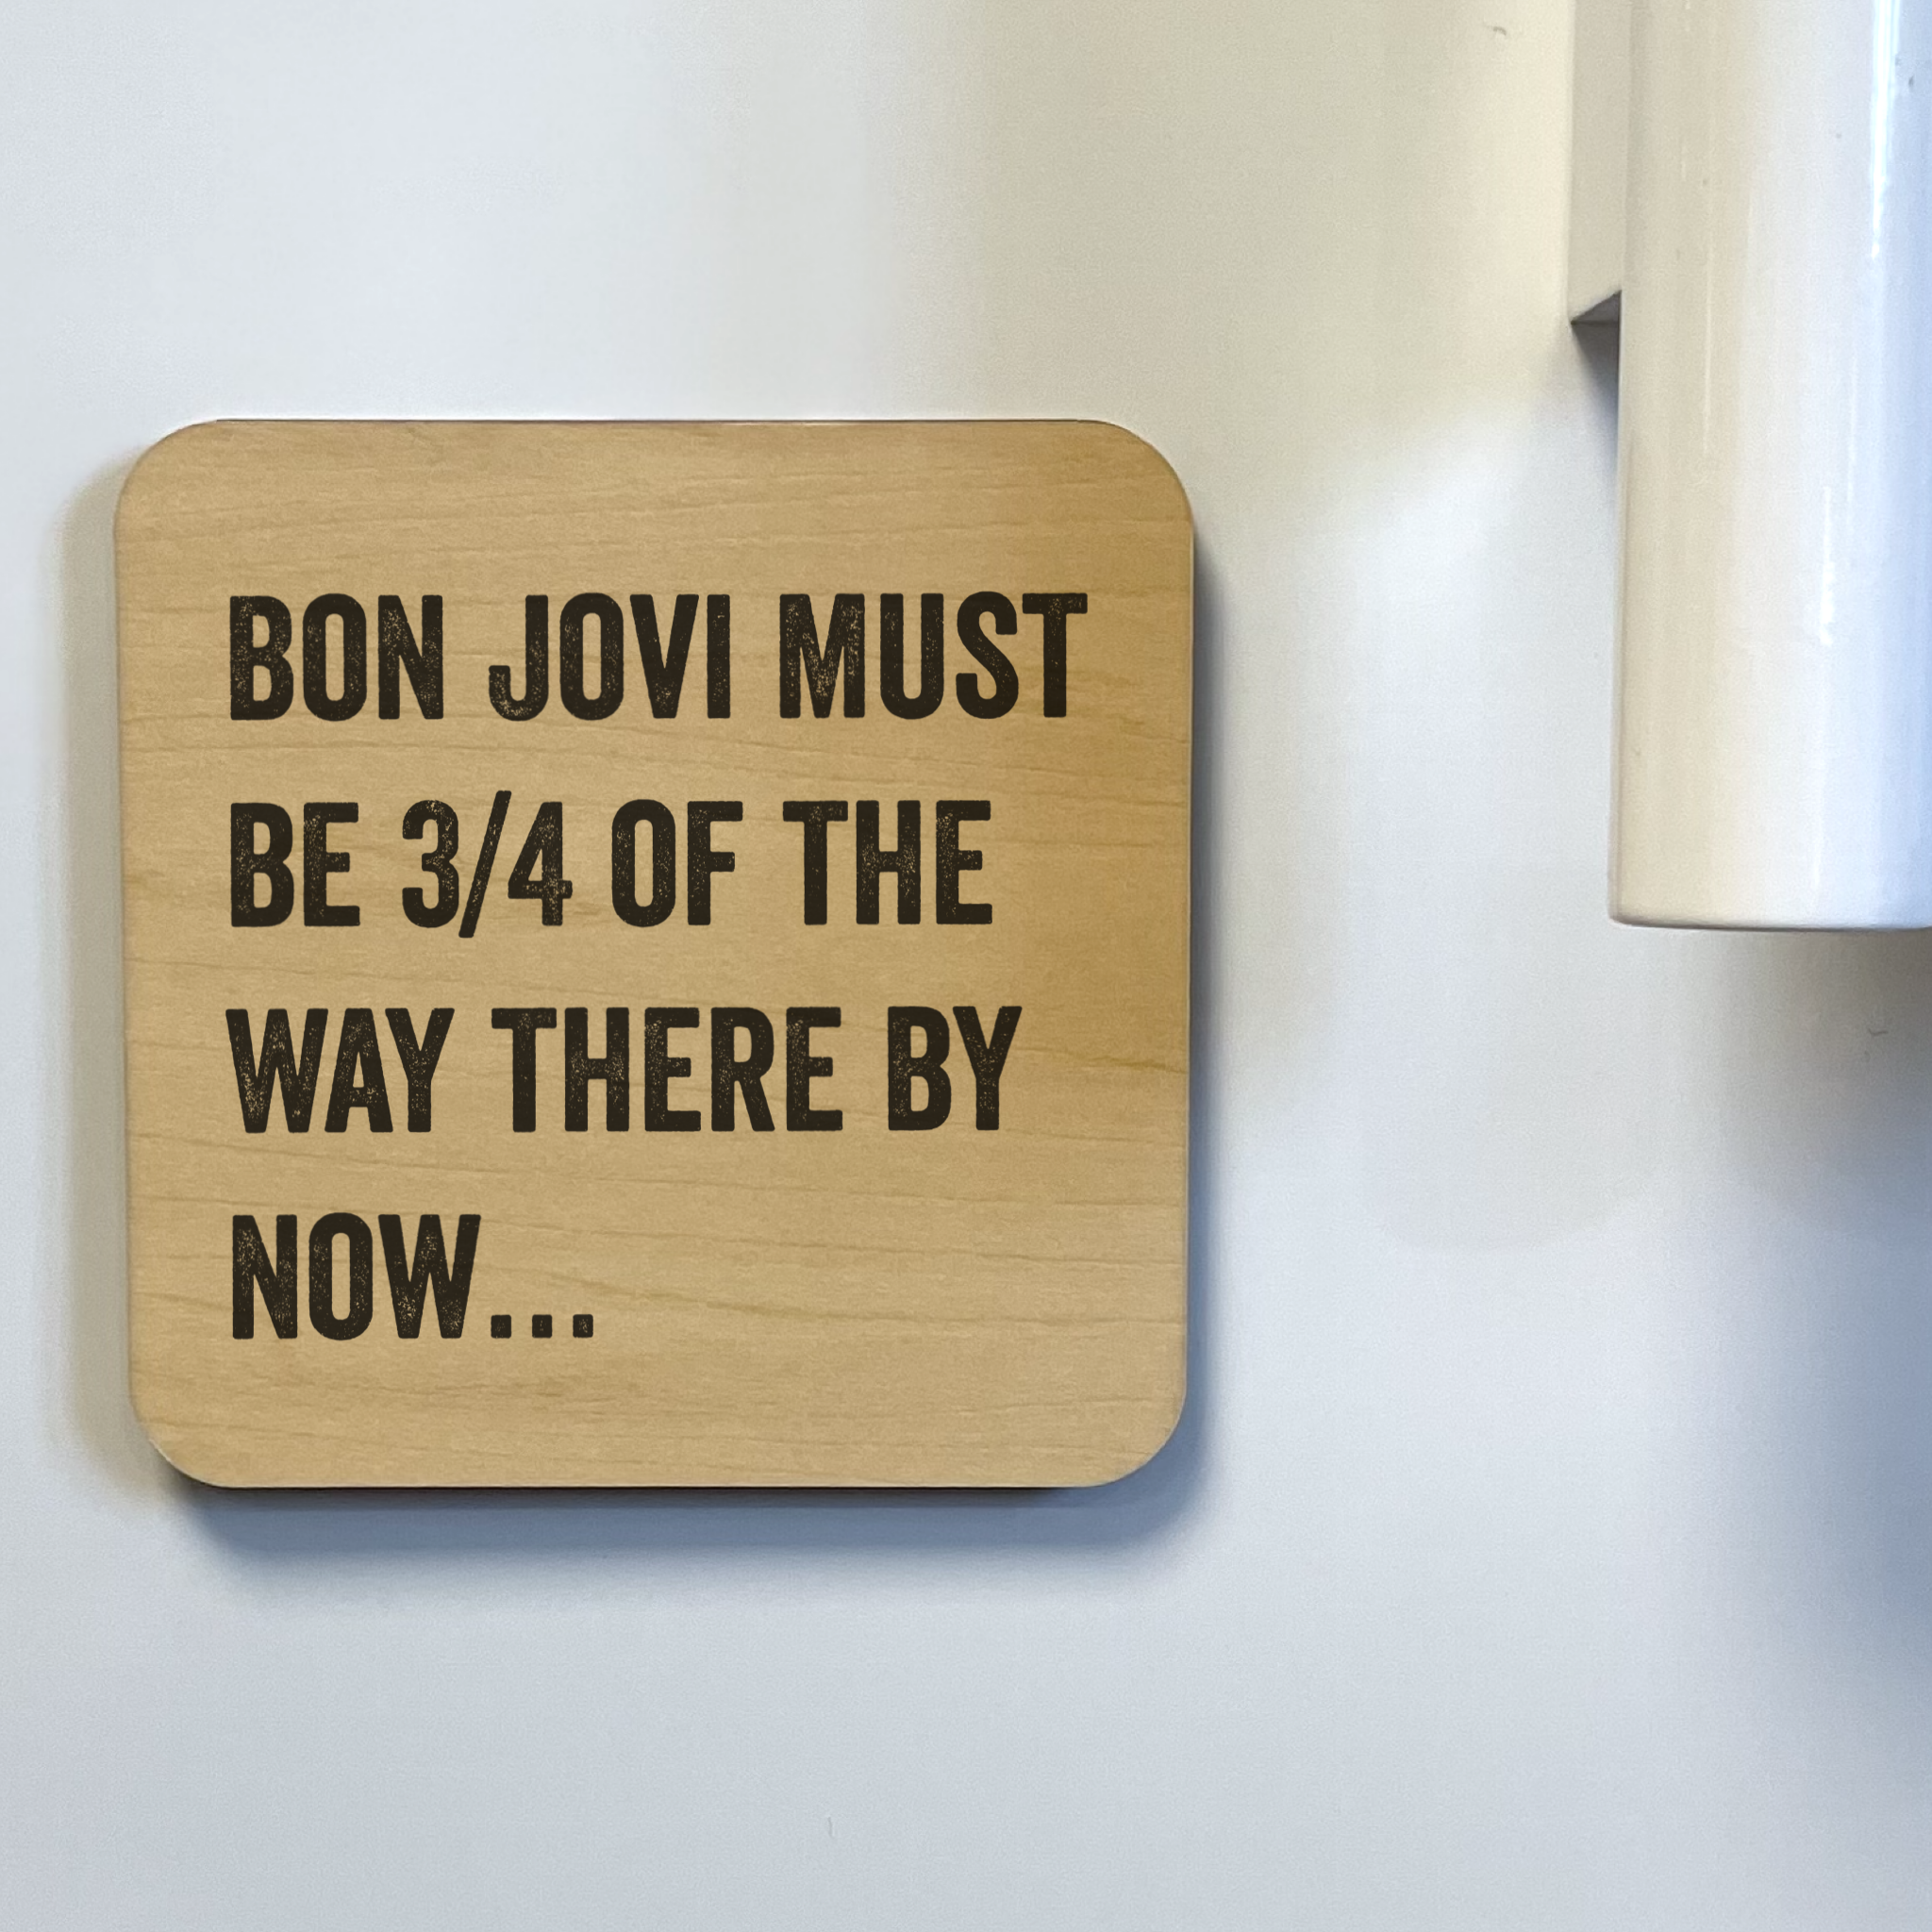 BON JOVI MUST BE 3/4 OF THE WAY THERE DK MAGNET / DRINK COASTER